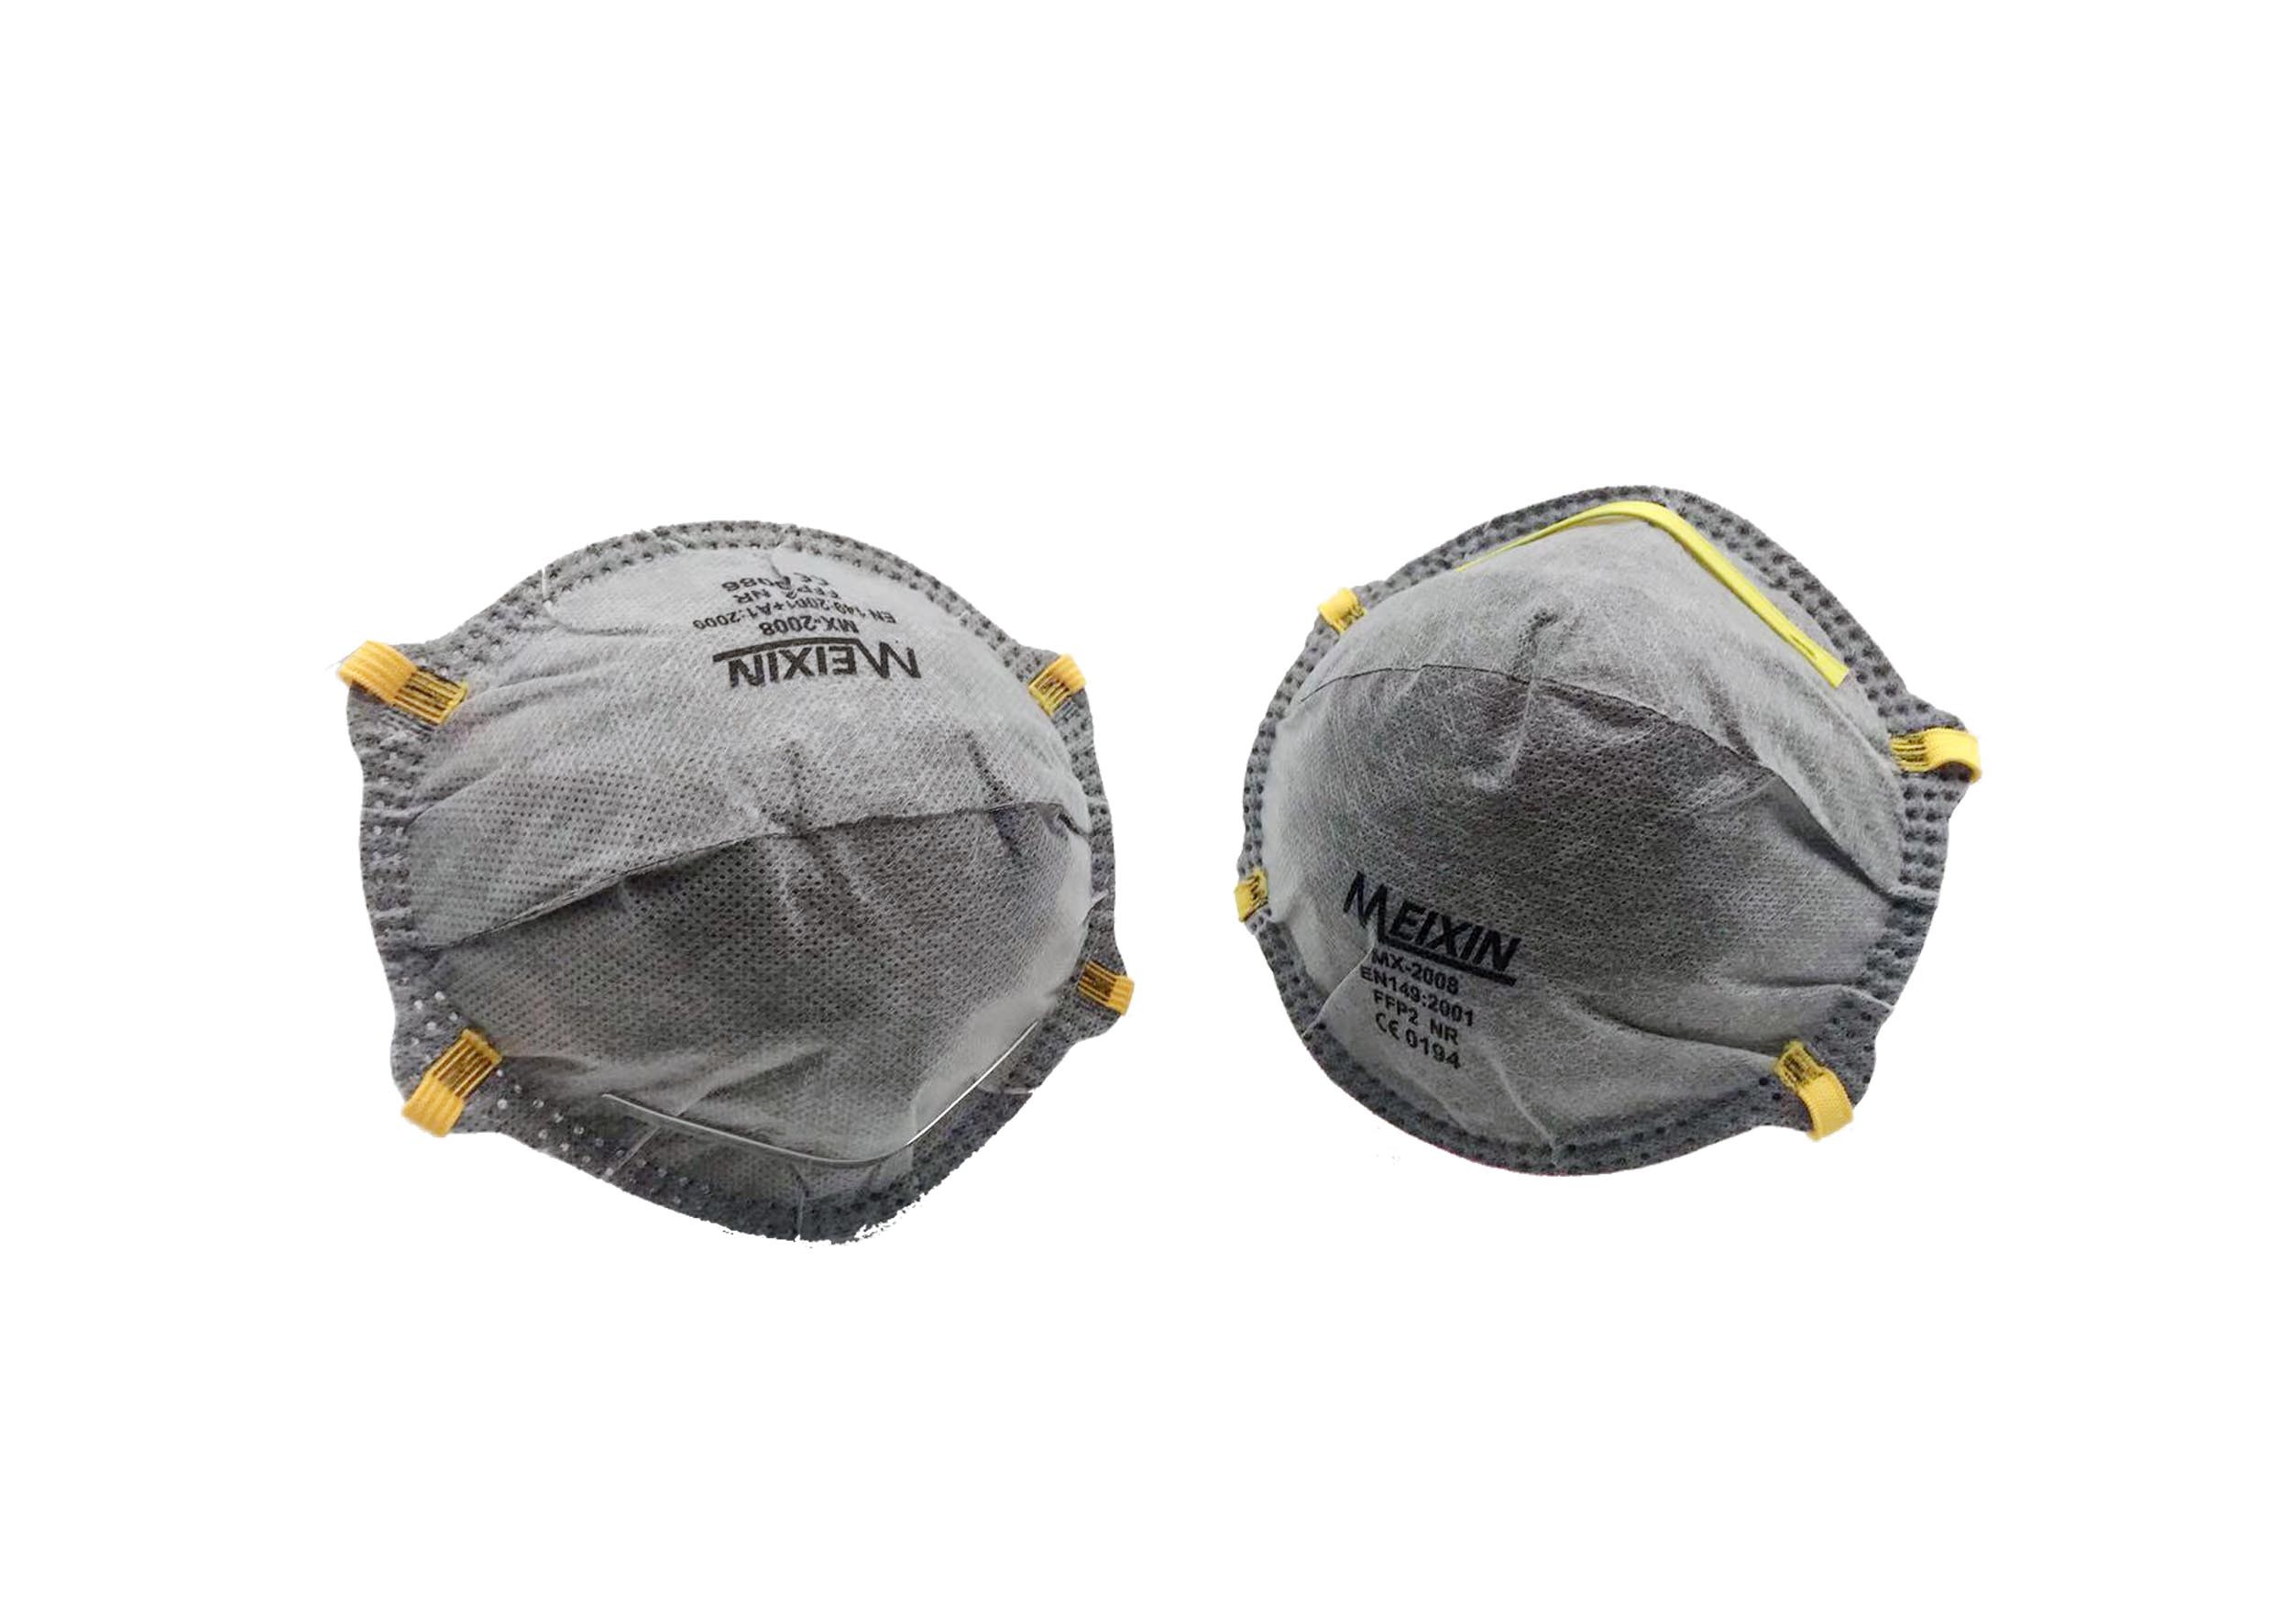  Anti Pollution Valve Face Mask Easy Breathing Dust Protective With Carbon Filter Manufactures